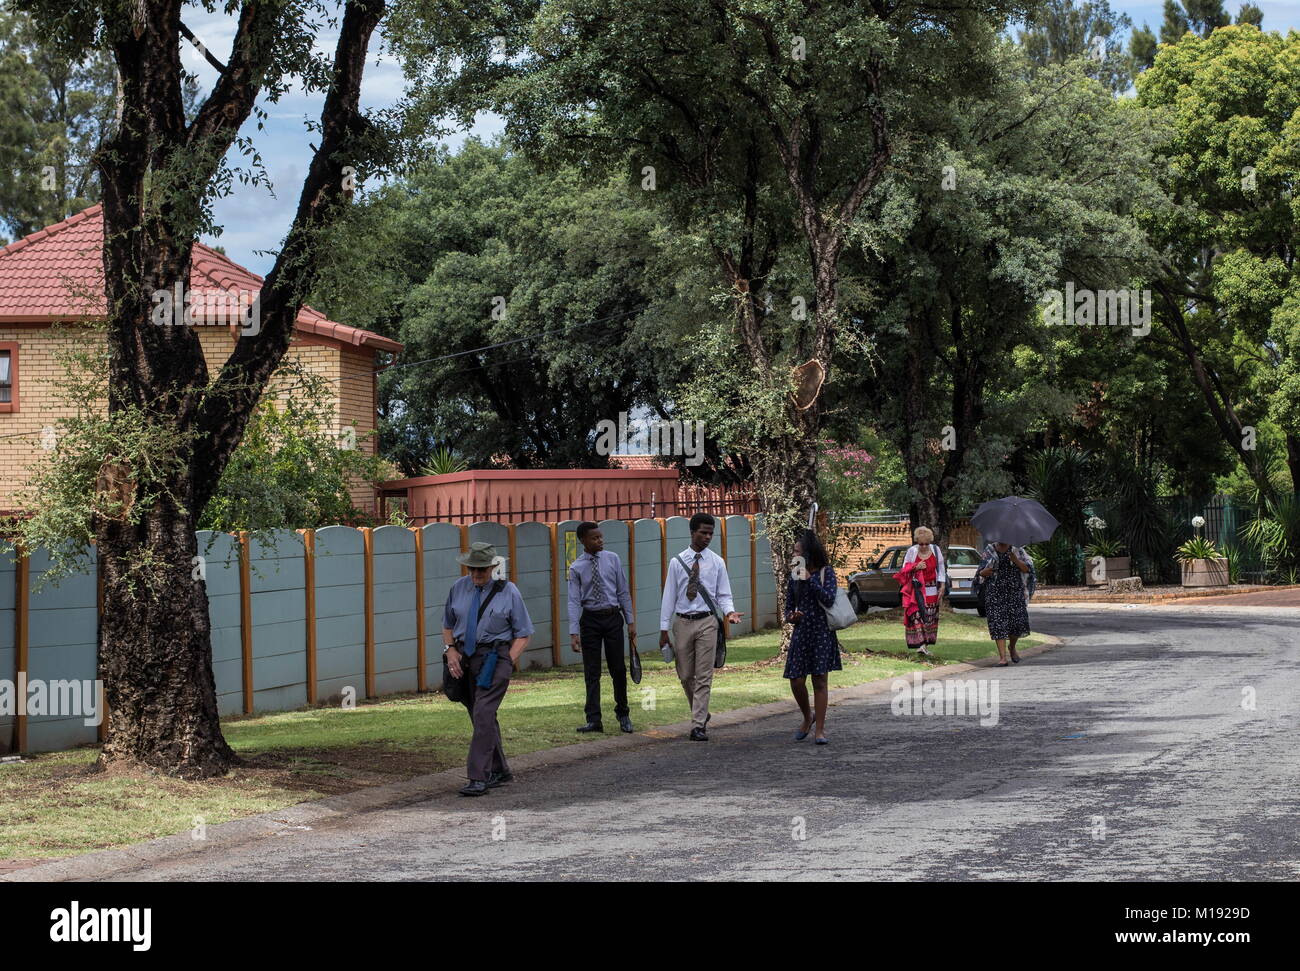 Johannesburg, South Africa - unknown members of the Jehovah's Witness sect work the streets of the city, image in landscape format Stock Photo